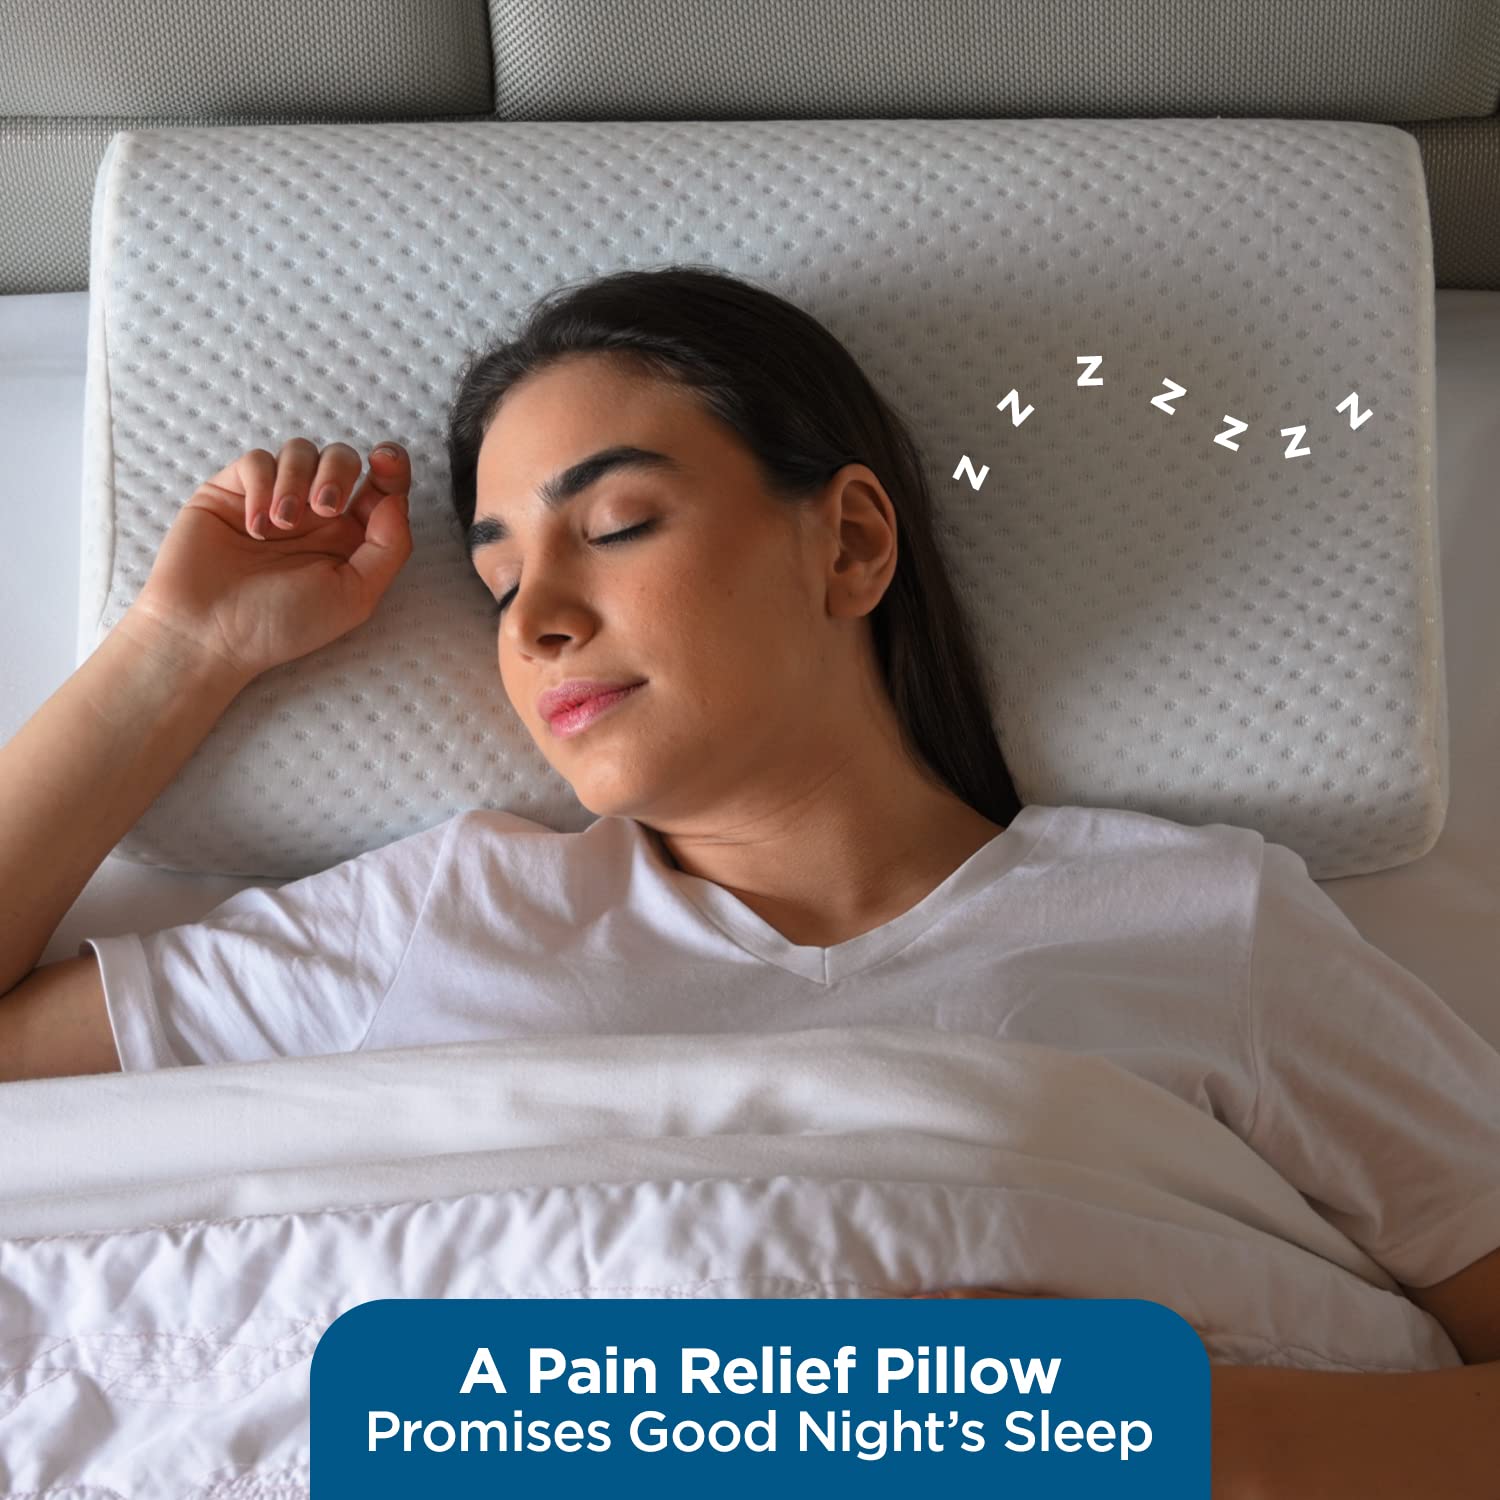 Cervical Pillow – What Is It and Why Should I Use It?